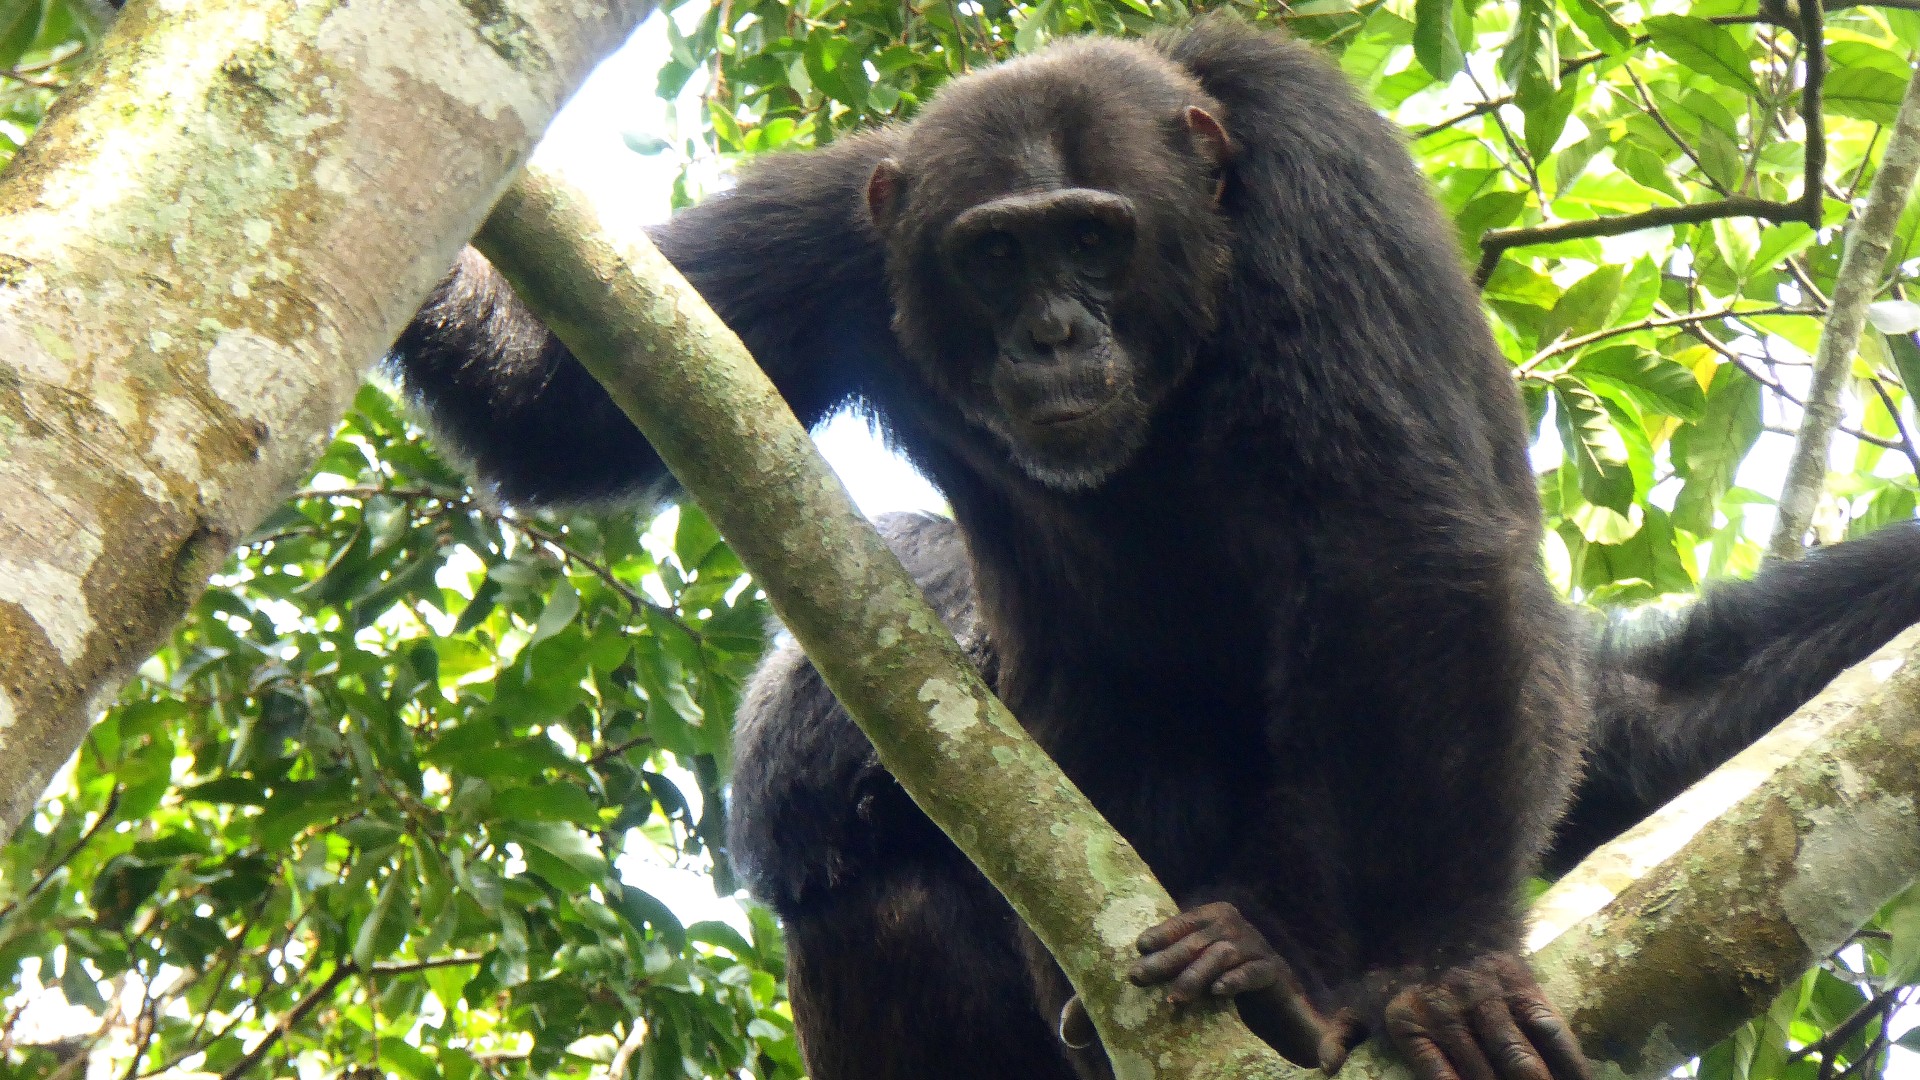 A chimpanzee sitting high up in the treetops, gripping a tree branch